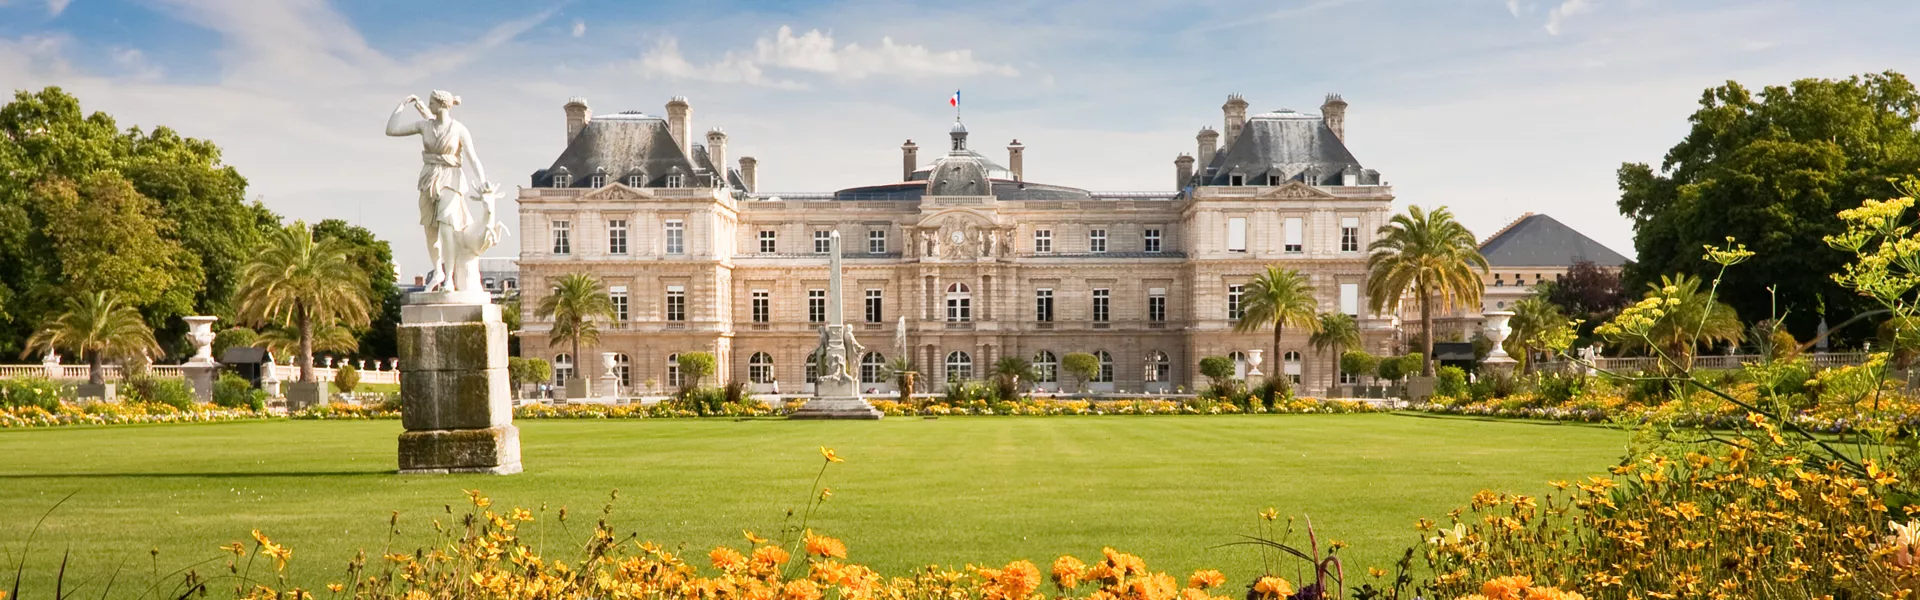 The Luxembourg Gardens and Palace